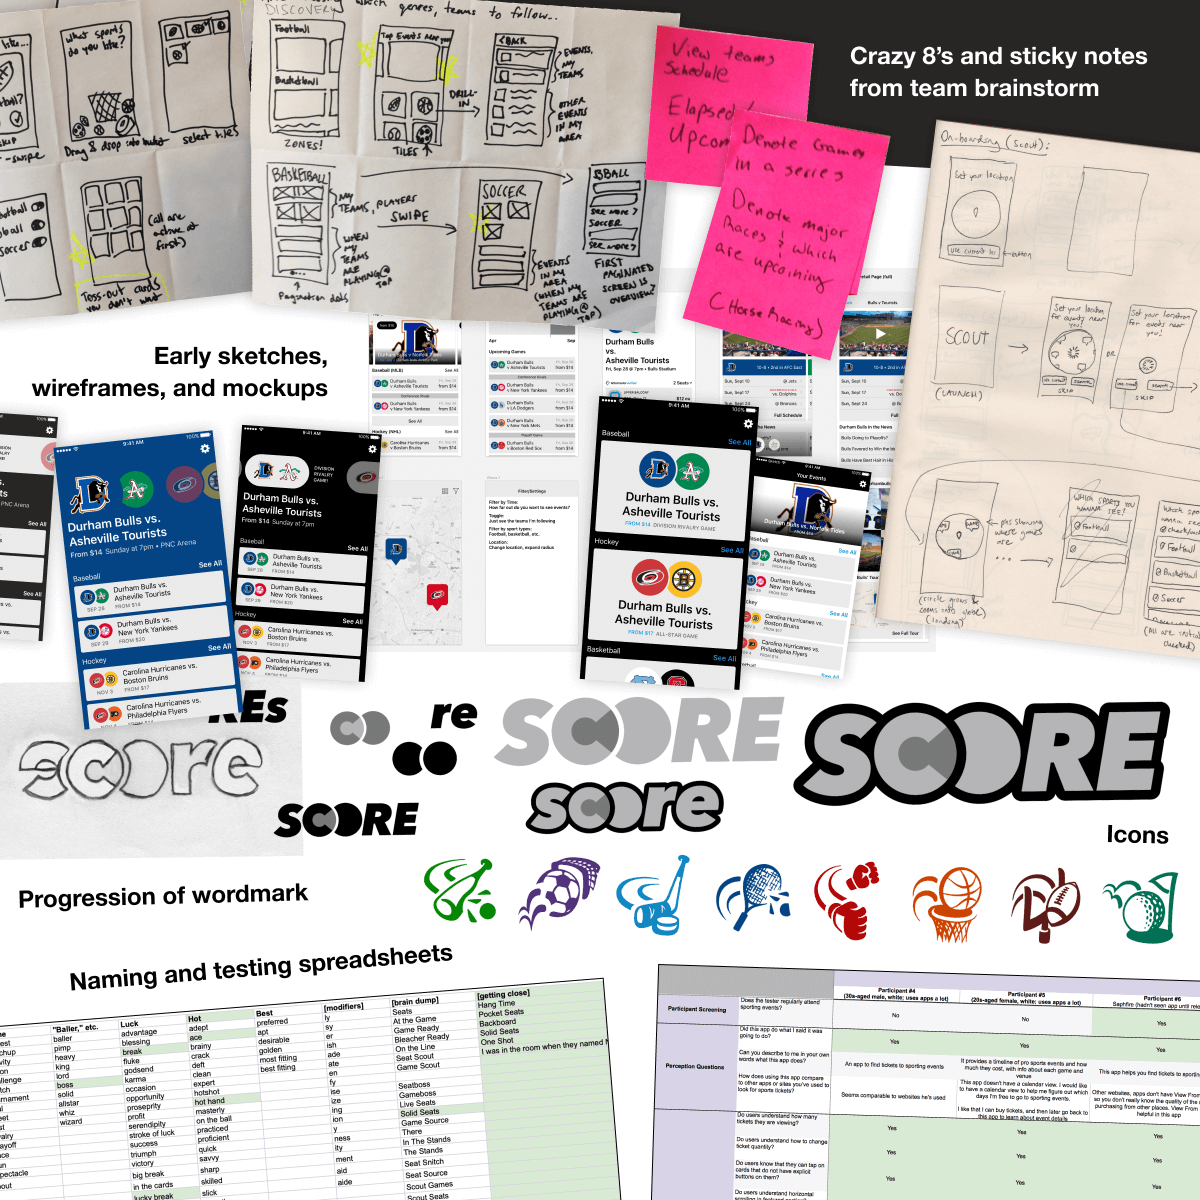 Collage of crazy 8 sketches and sticky notes from group brainstorm; sketches, wireframes, and mockups from UI development; the progression of the Score wordmark; icons; naming and testing spreadsheets